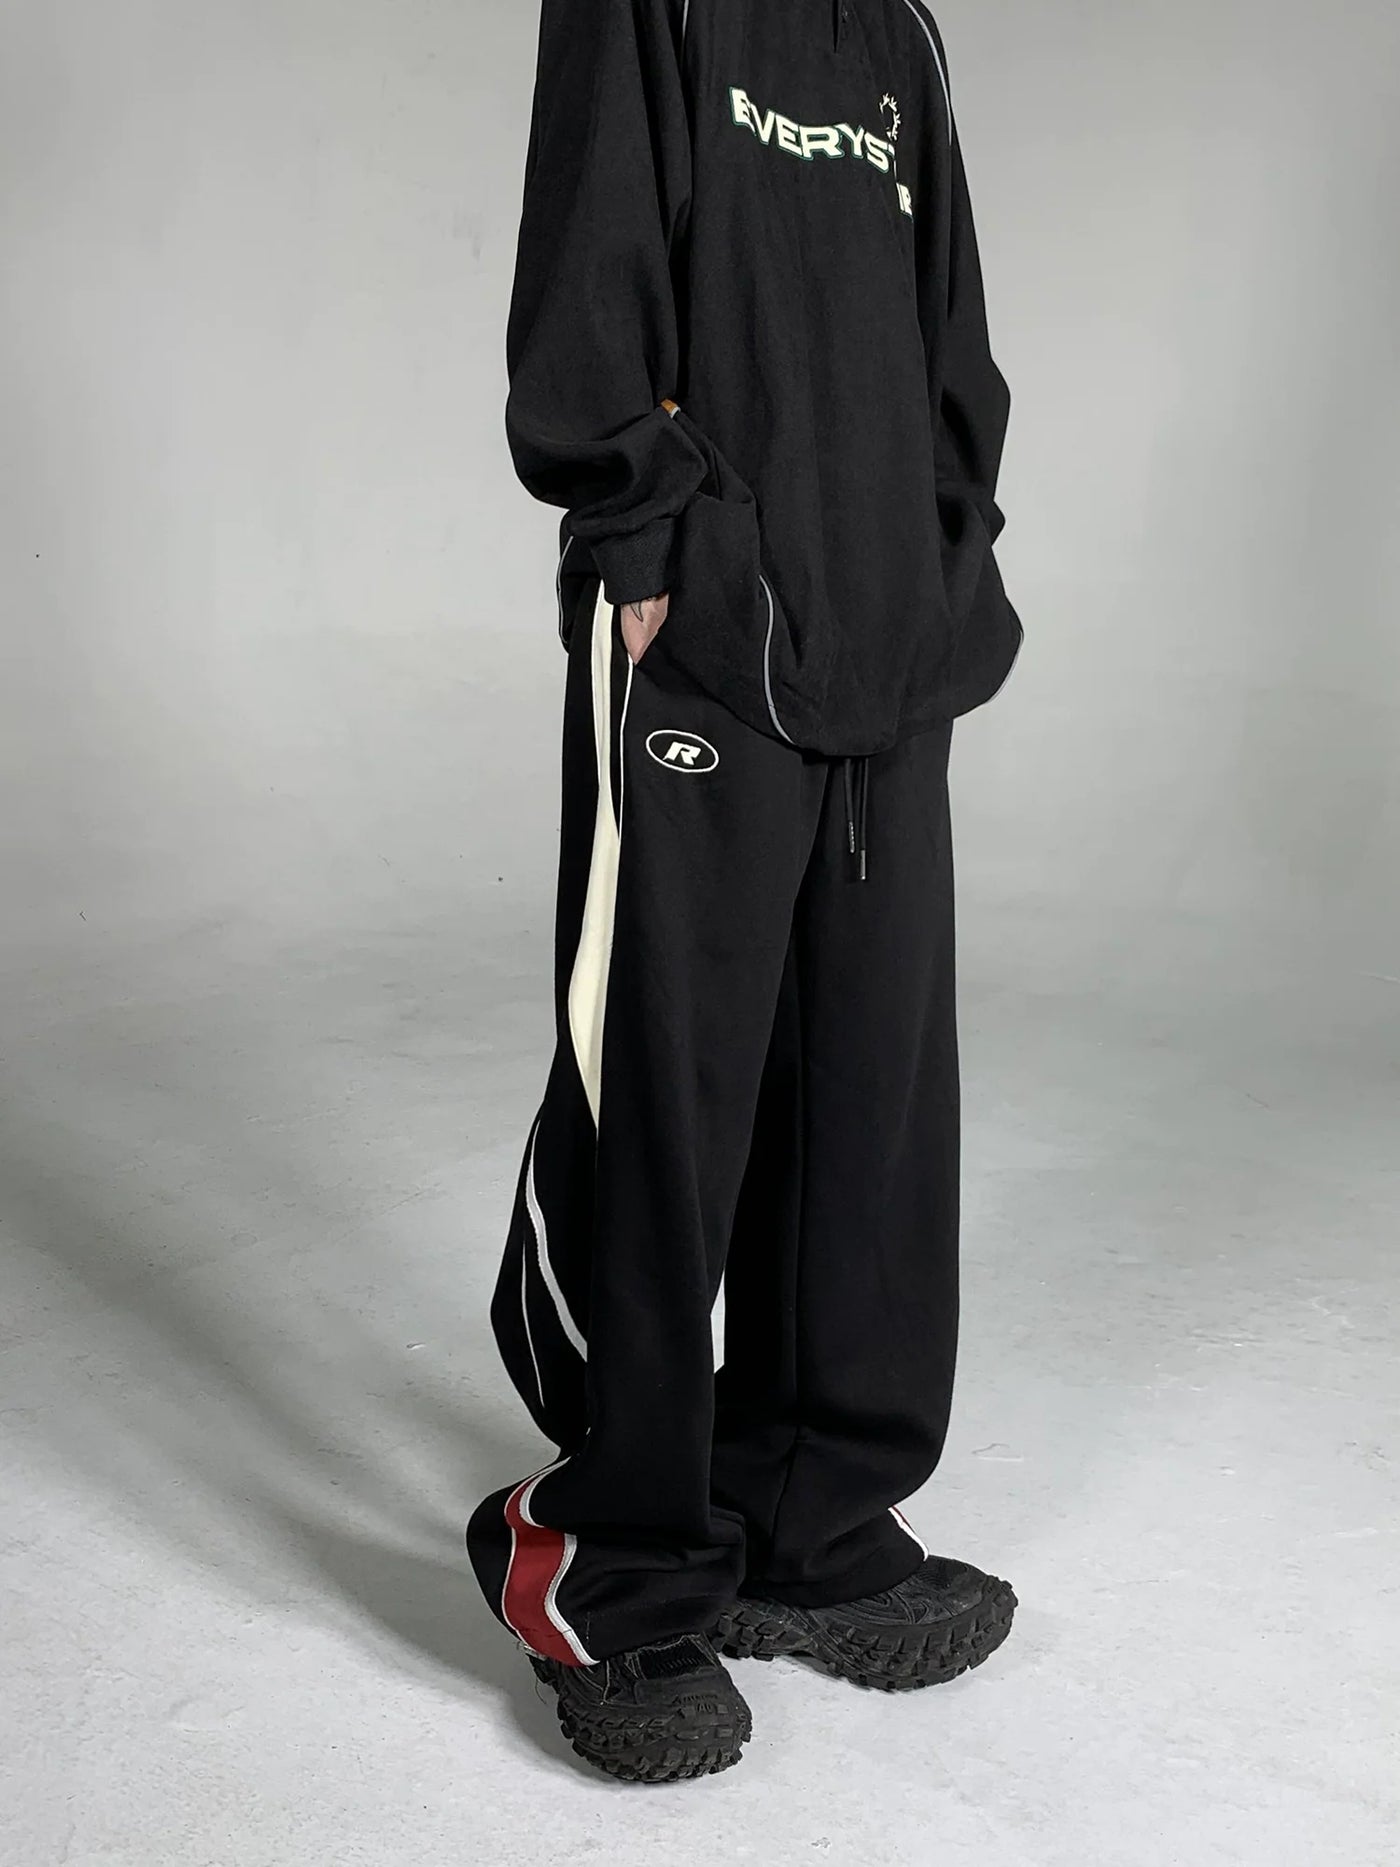 Letter Embroidery Side Contrast Sweatpants Korean Street Fashion Pants By Ash Dark Shop Online at OH Vault